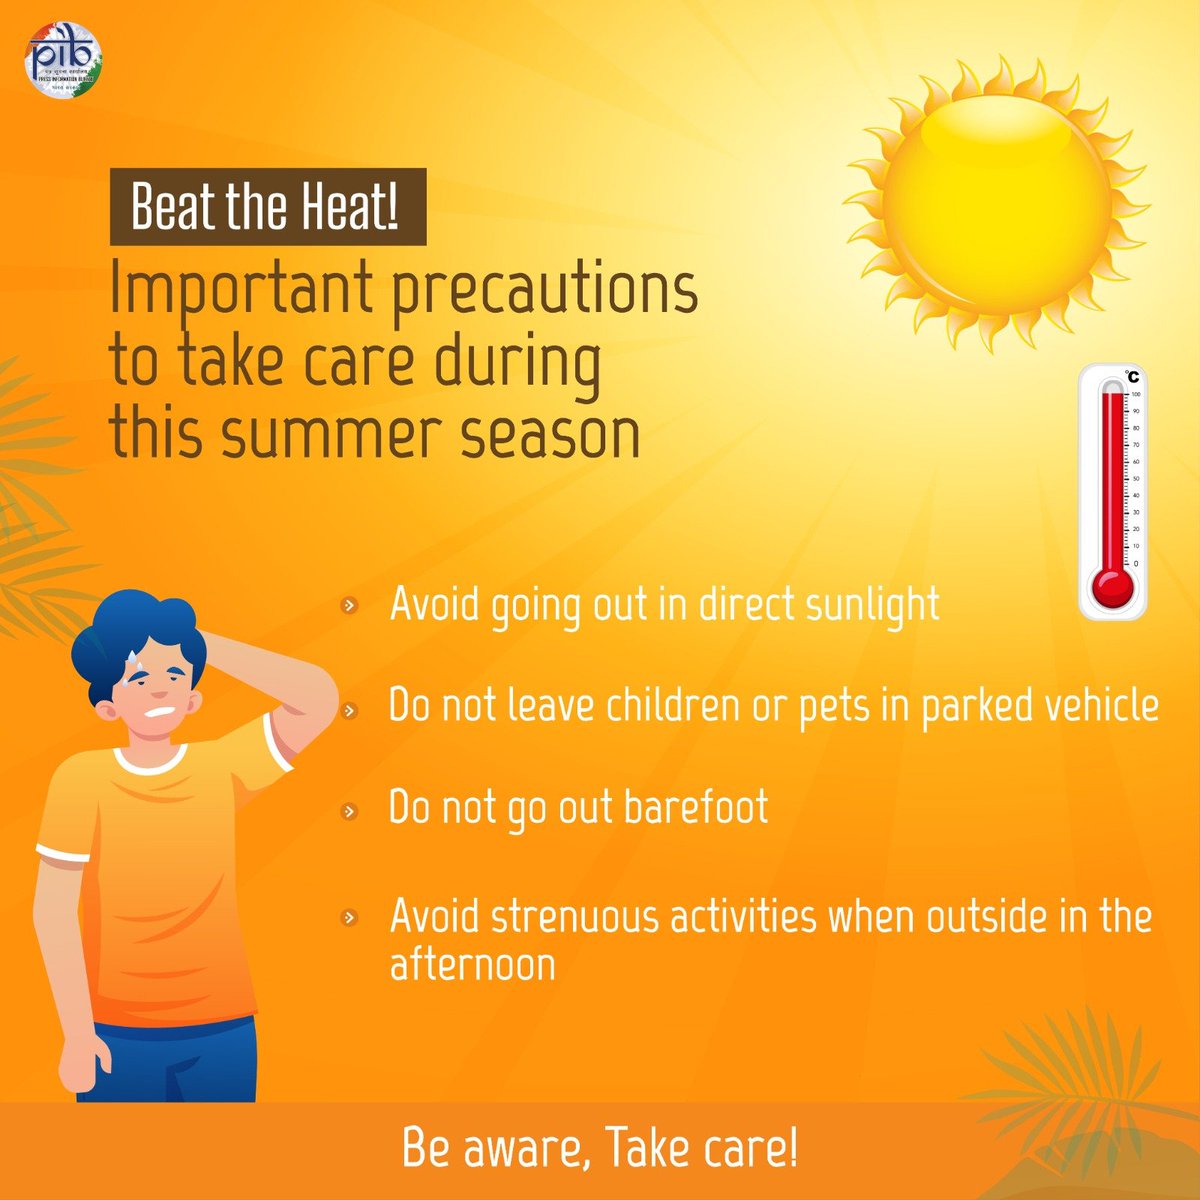 Beat the Heat!  Necessary precautions to take care of during this summer season!👇 📷Avoid going out in direct sunlight  📷#BeatTheHeat #HeatWave
@PIB_India